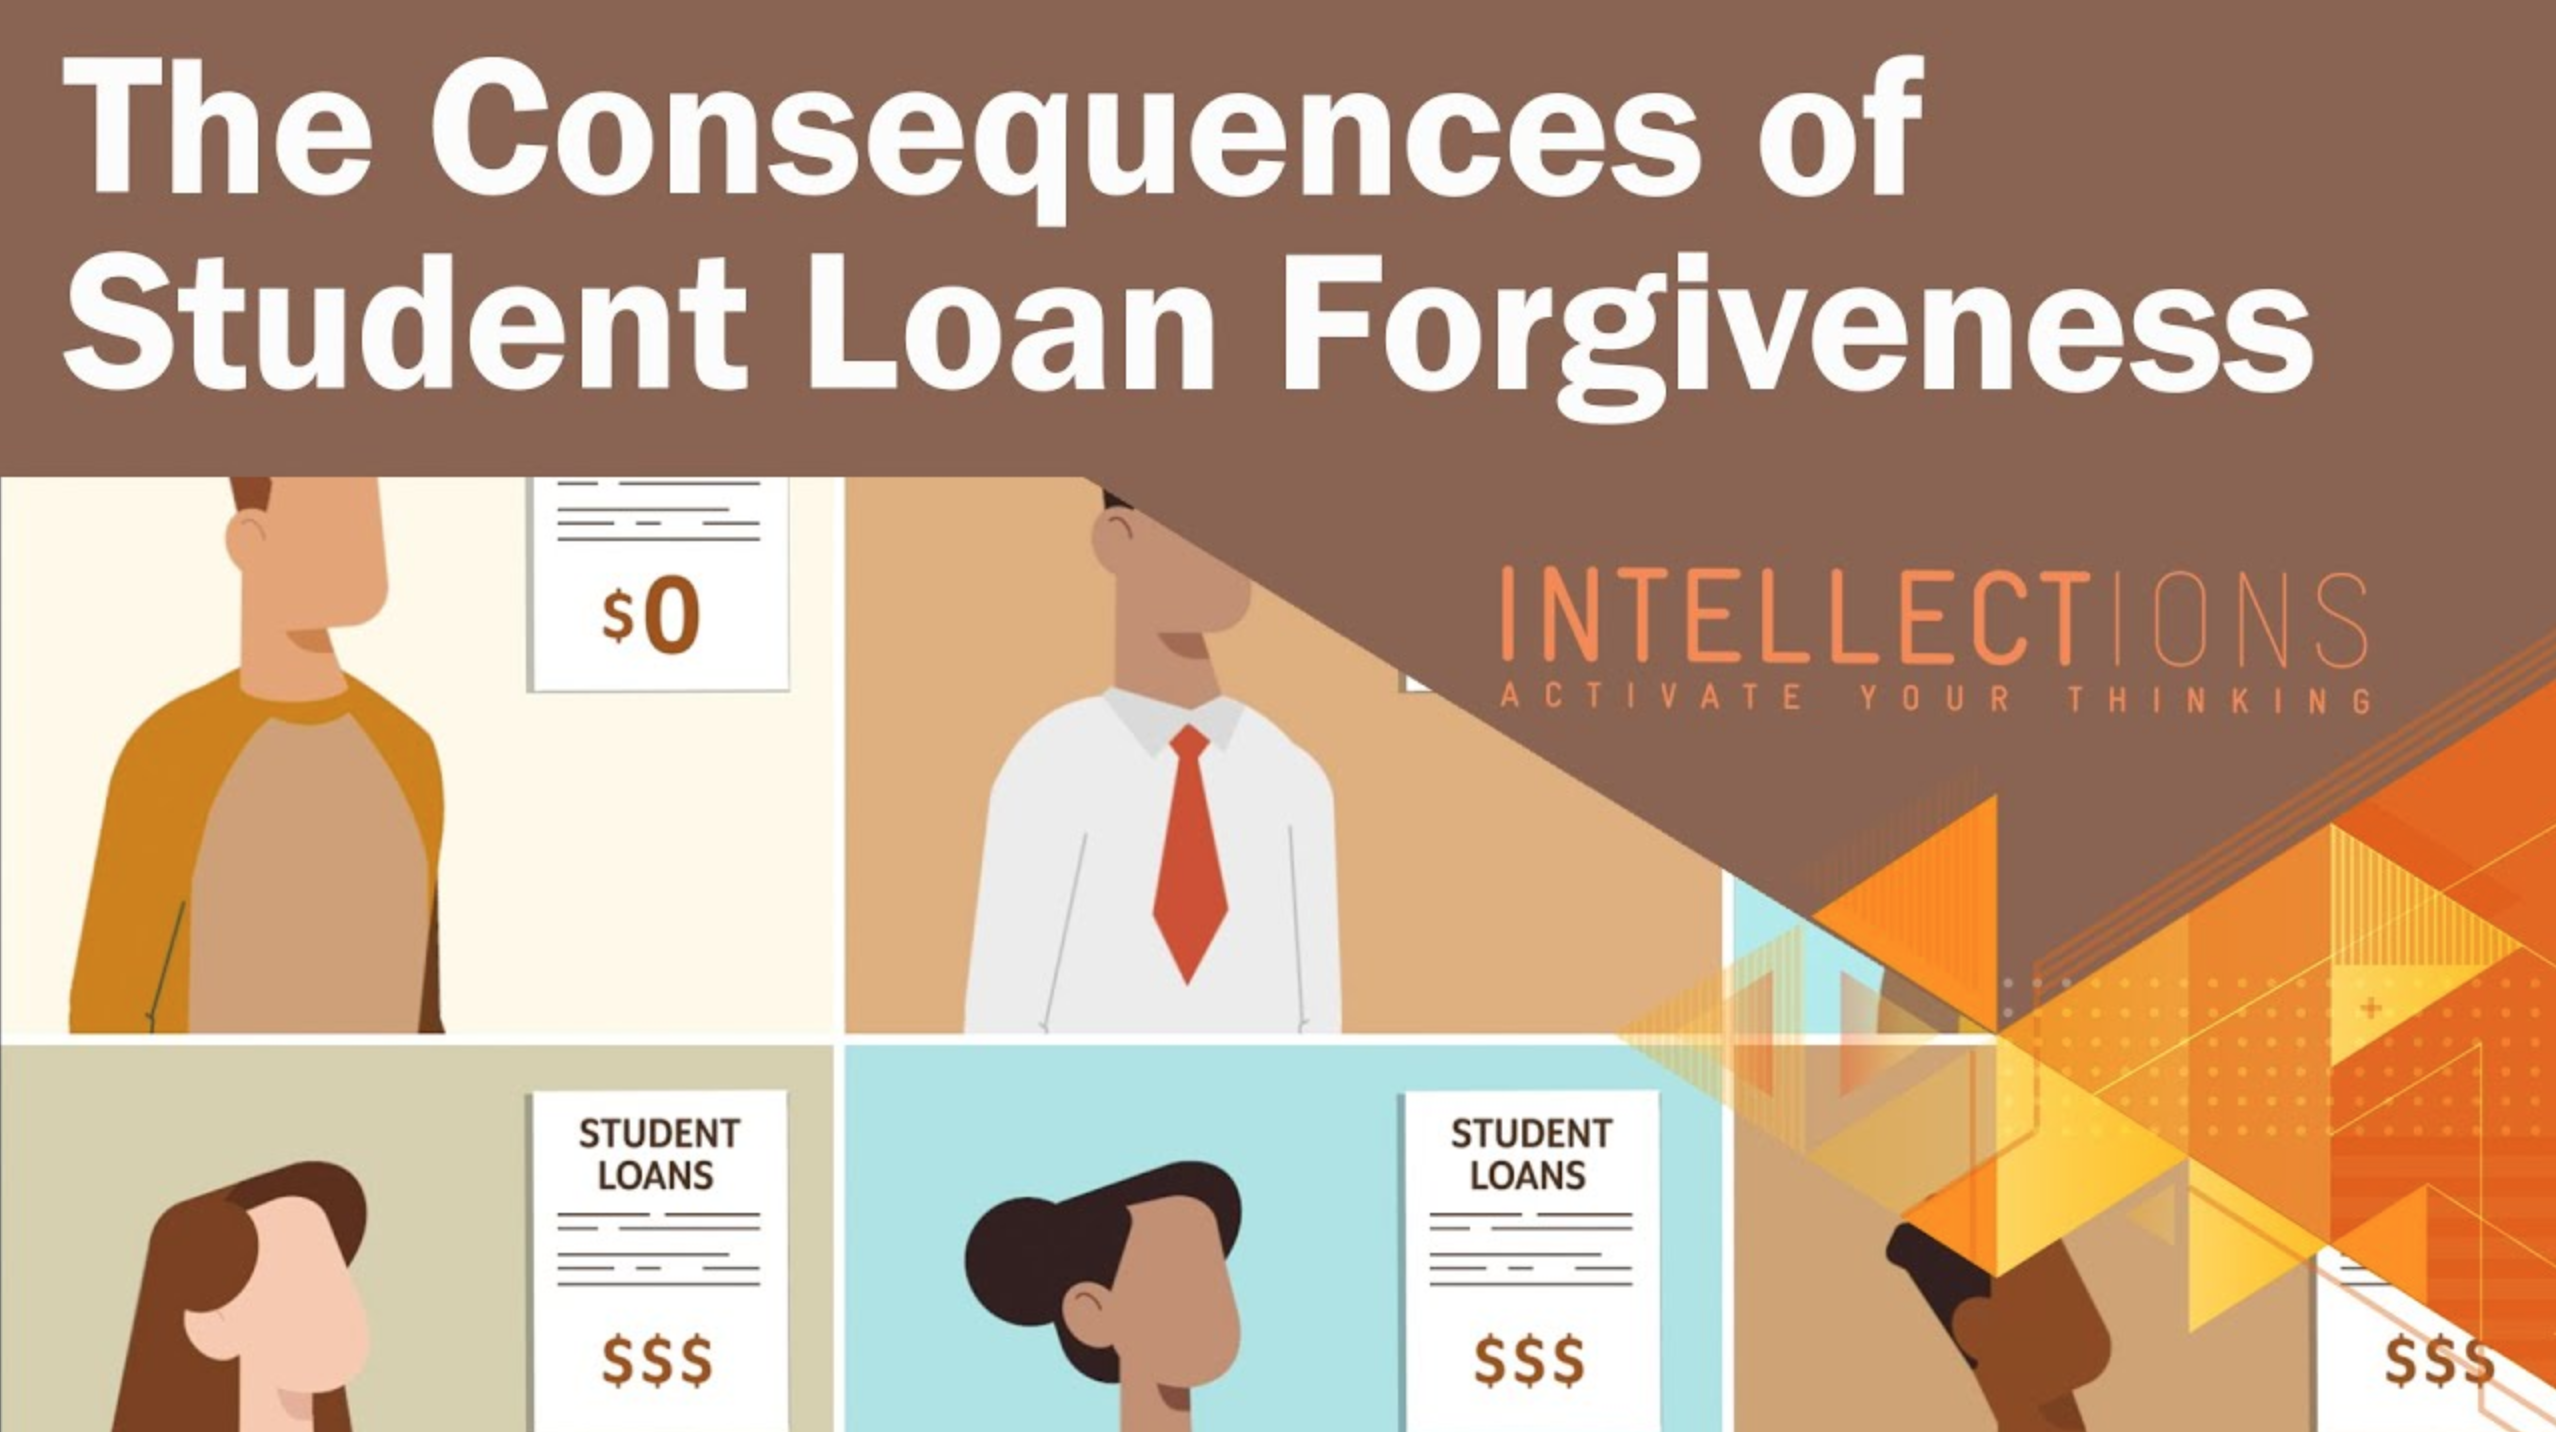 Poorly Targeted: Student Loan Forgiveness